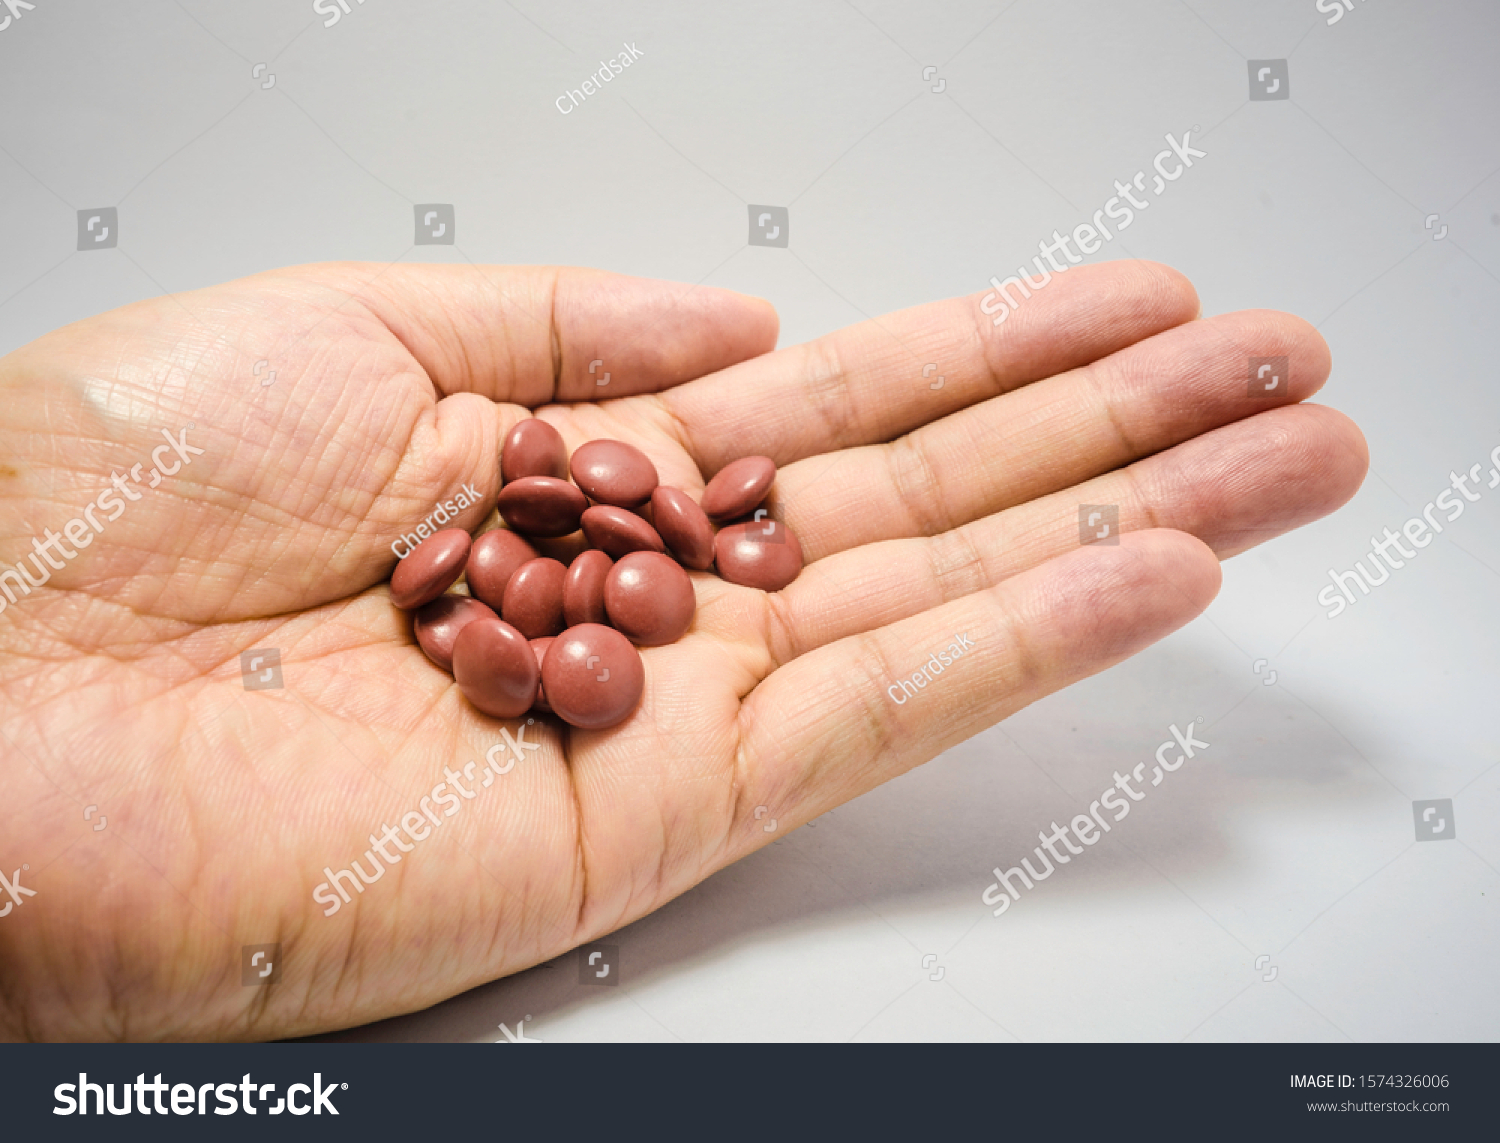 Brown pills on the left hand #1574326006